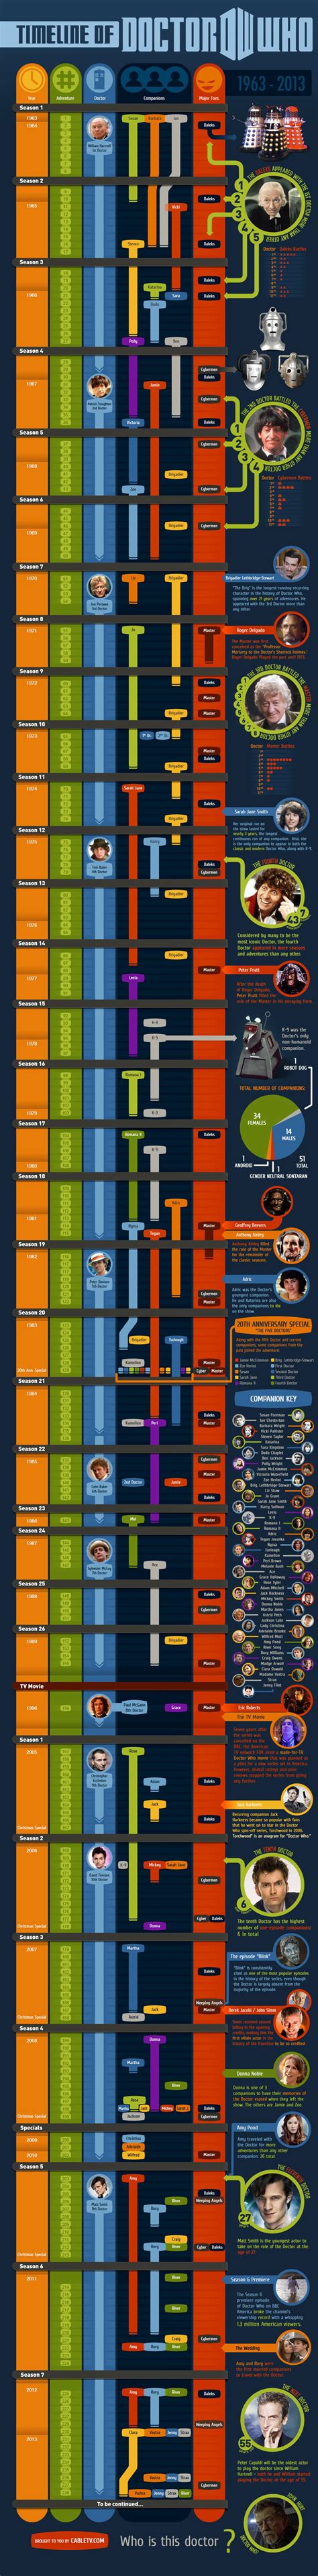 All Doctor Who Episodes In Chronological Order Infographic Topic Tv